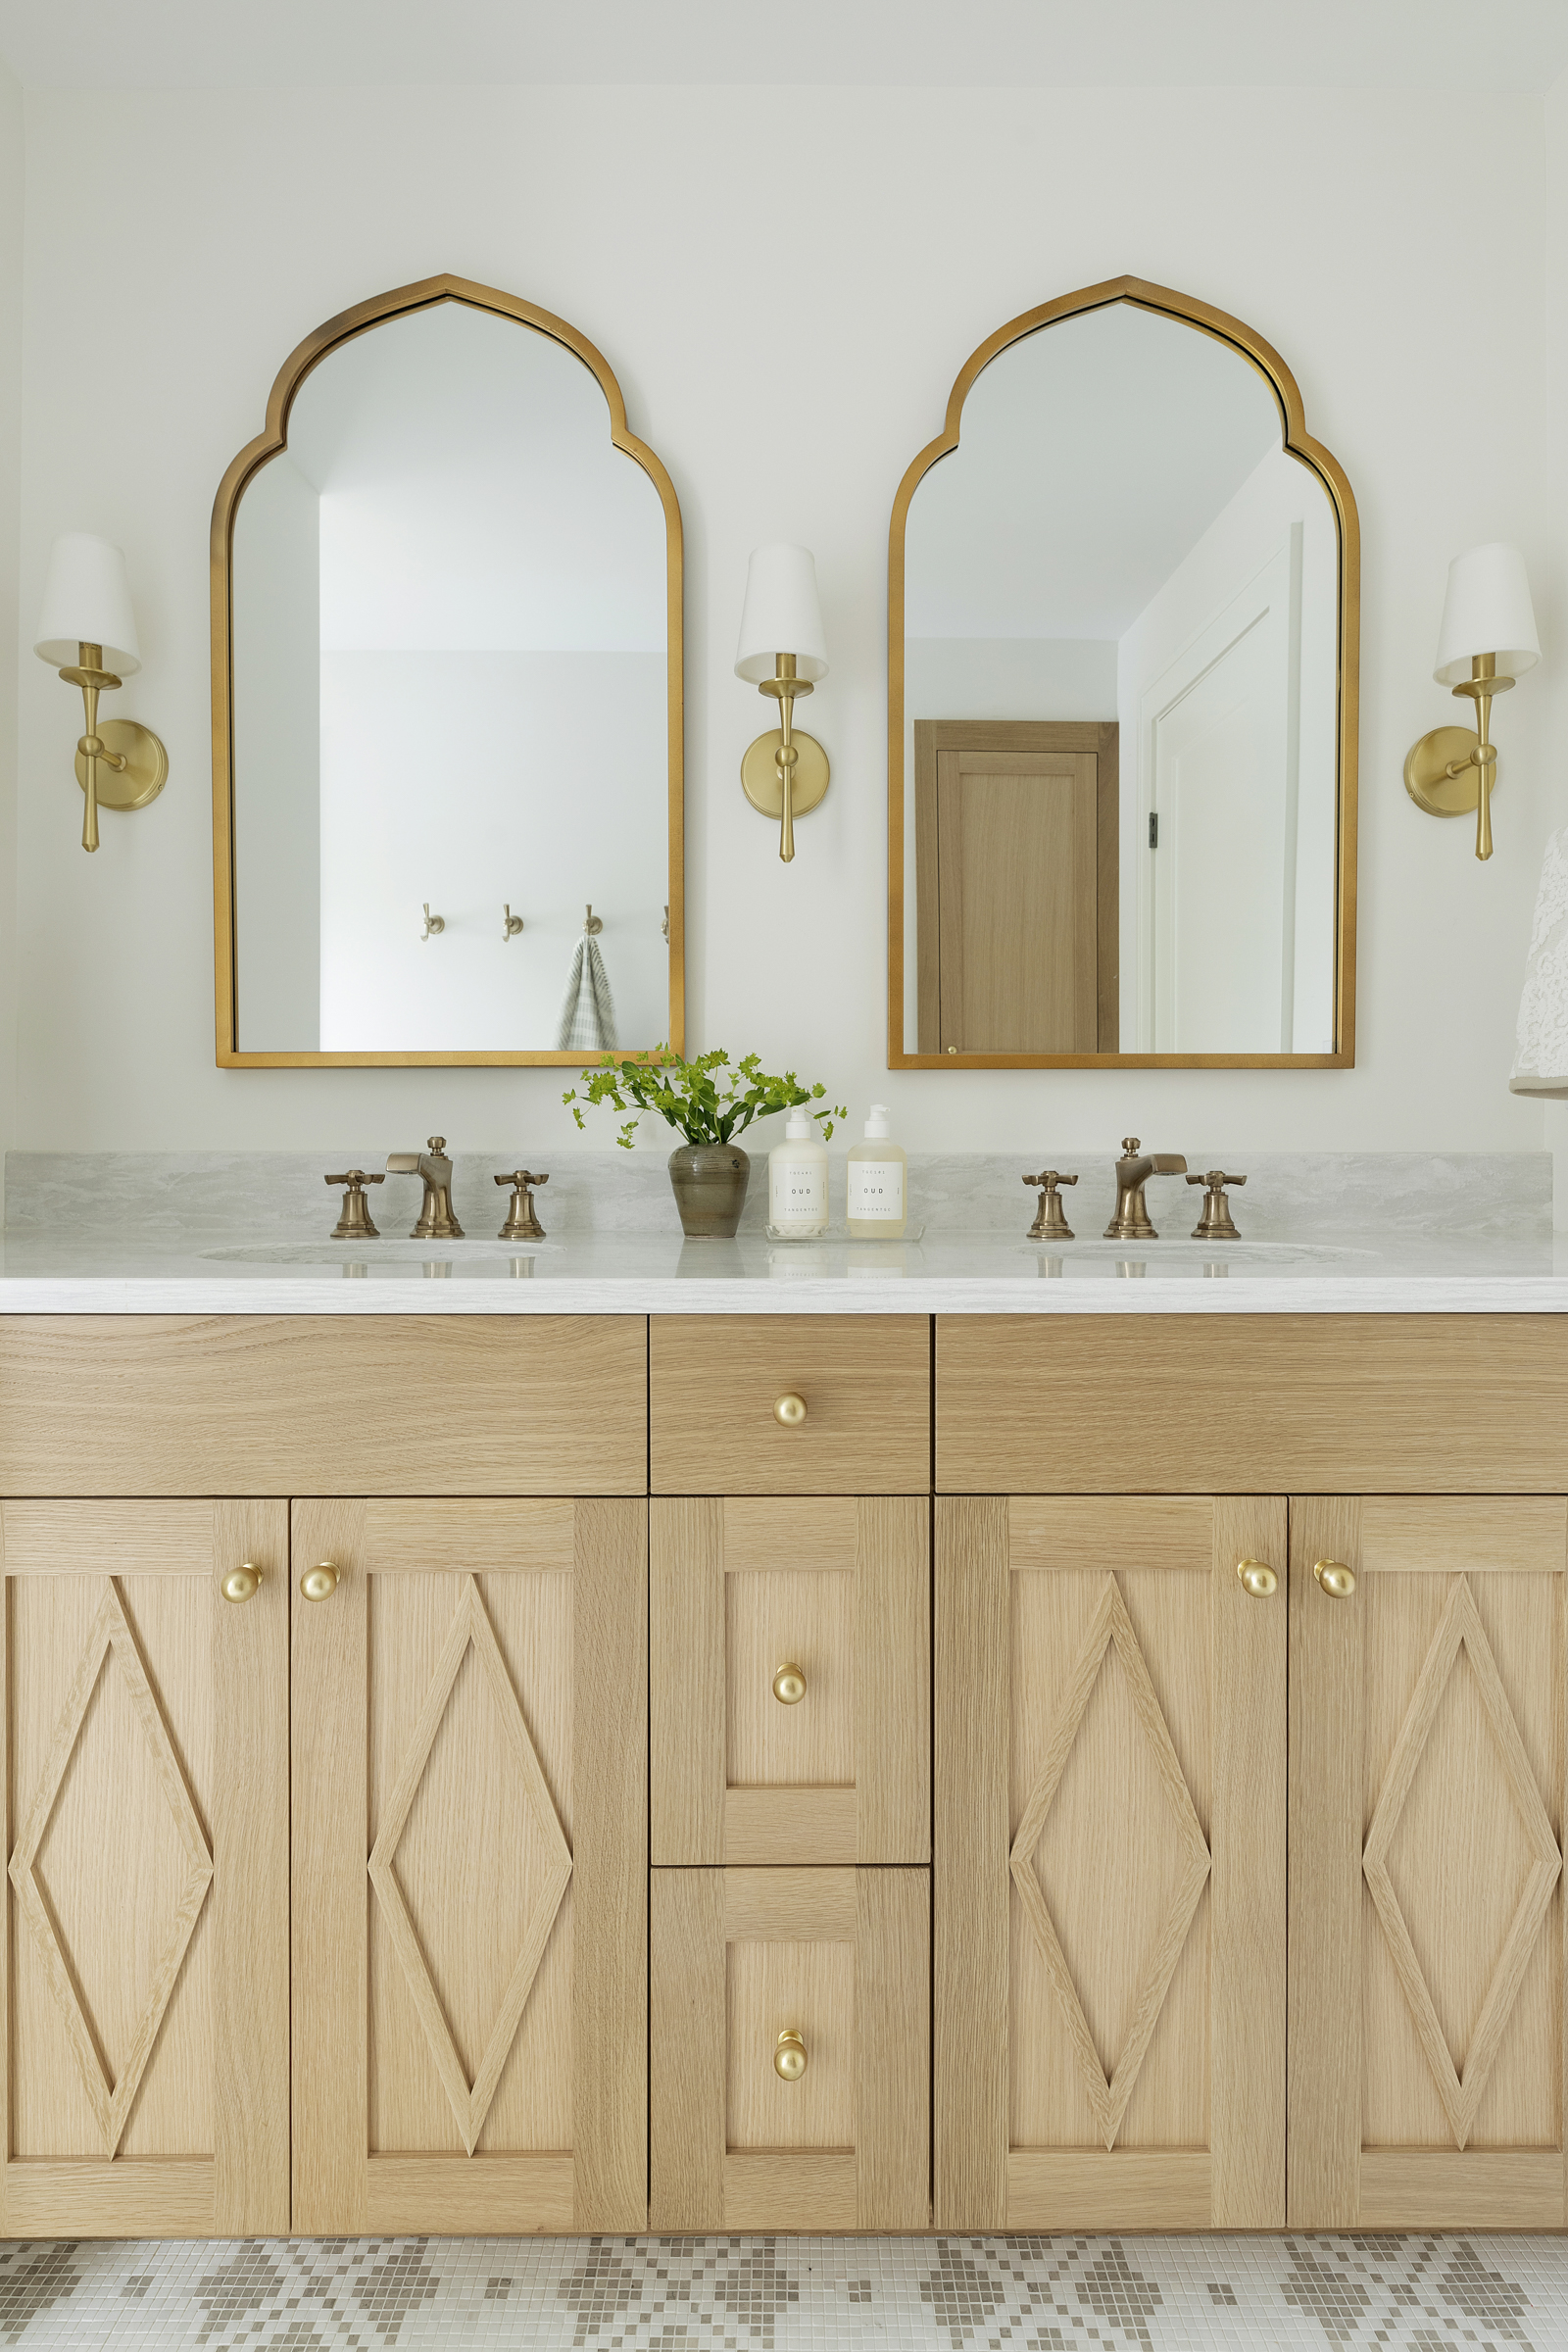 Twin Cities bathroom renovation with large white oak vanity and brass accents.